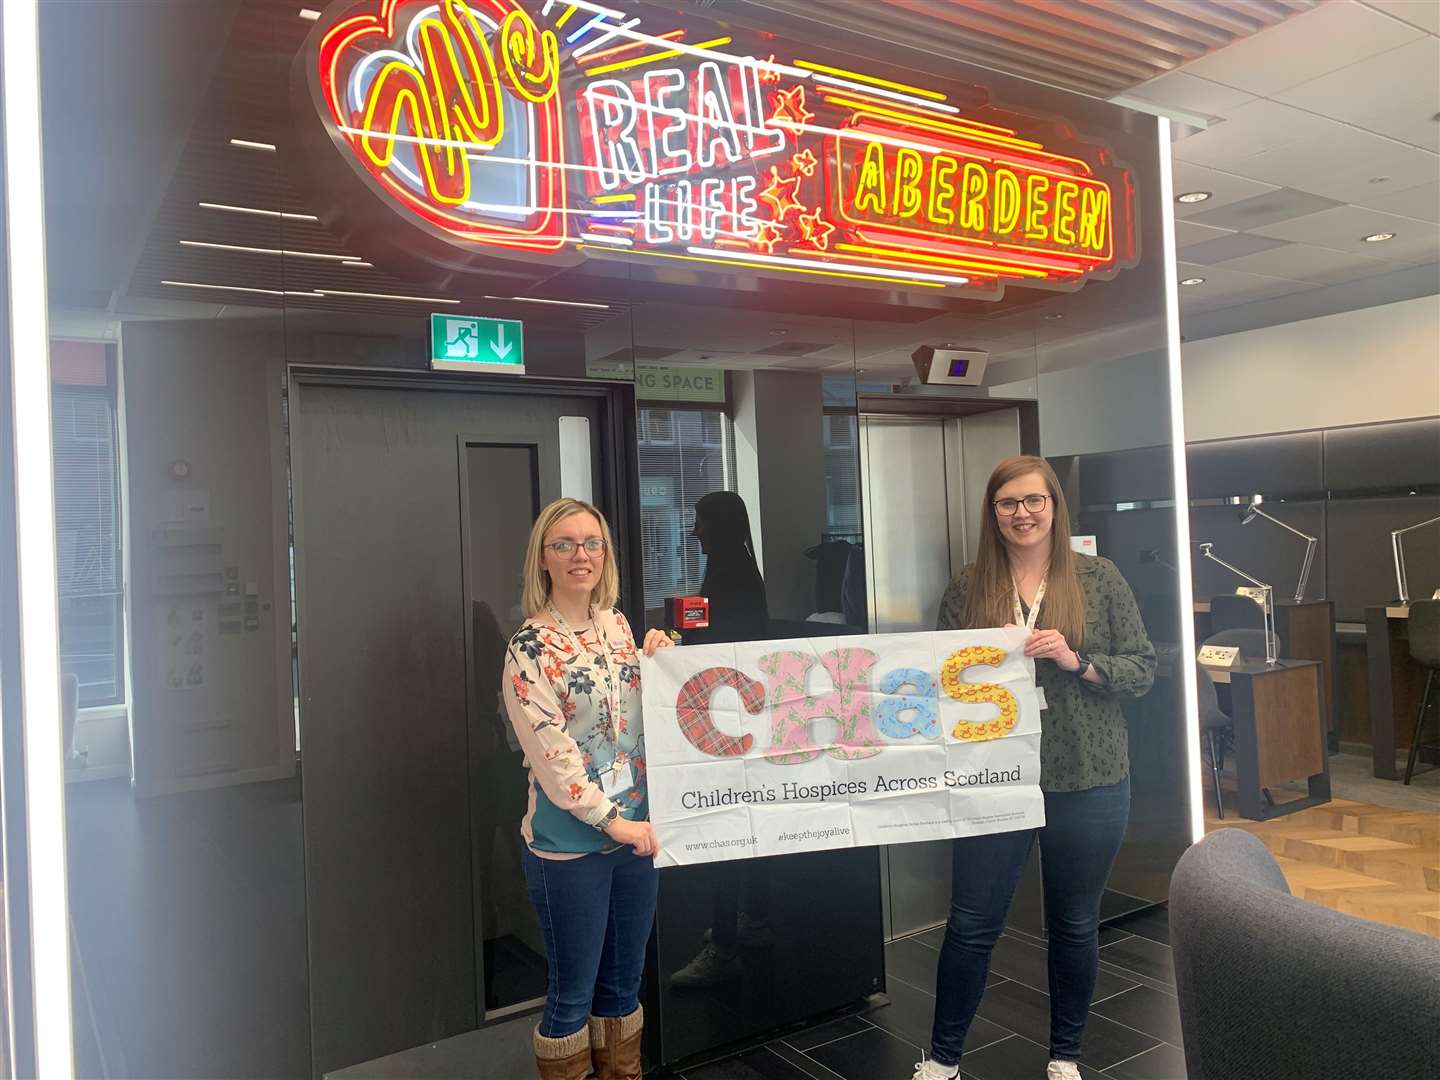 CHAS Volunteering Development Manager Fiona Harvey and Senior Community Fundraiser Emma Gartland at the opening of the new Aberdeen CHAS office.